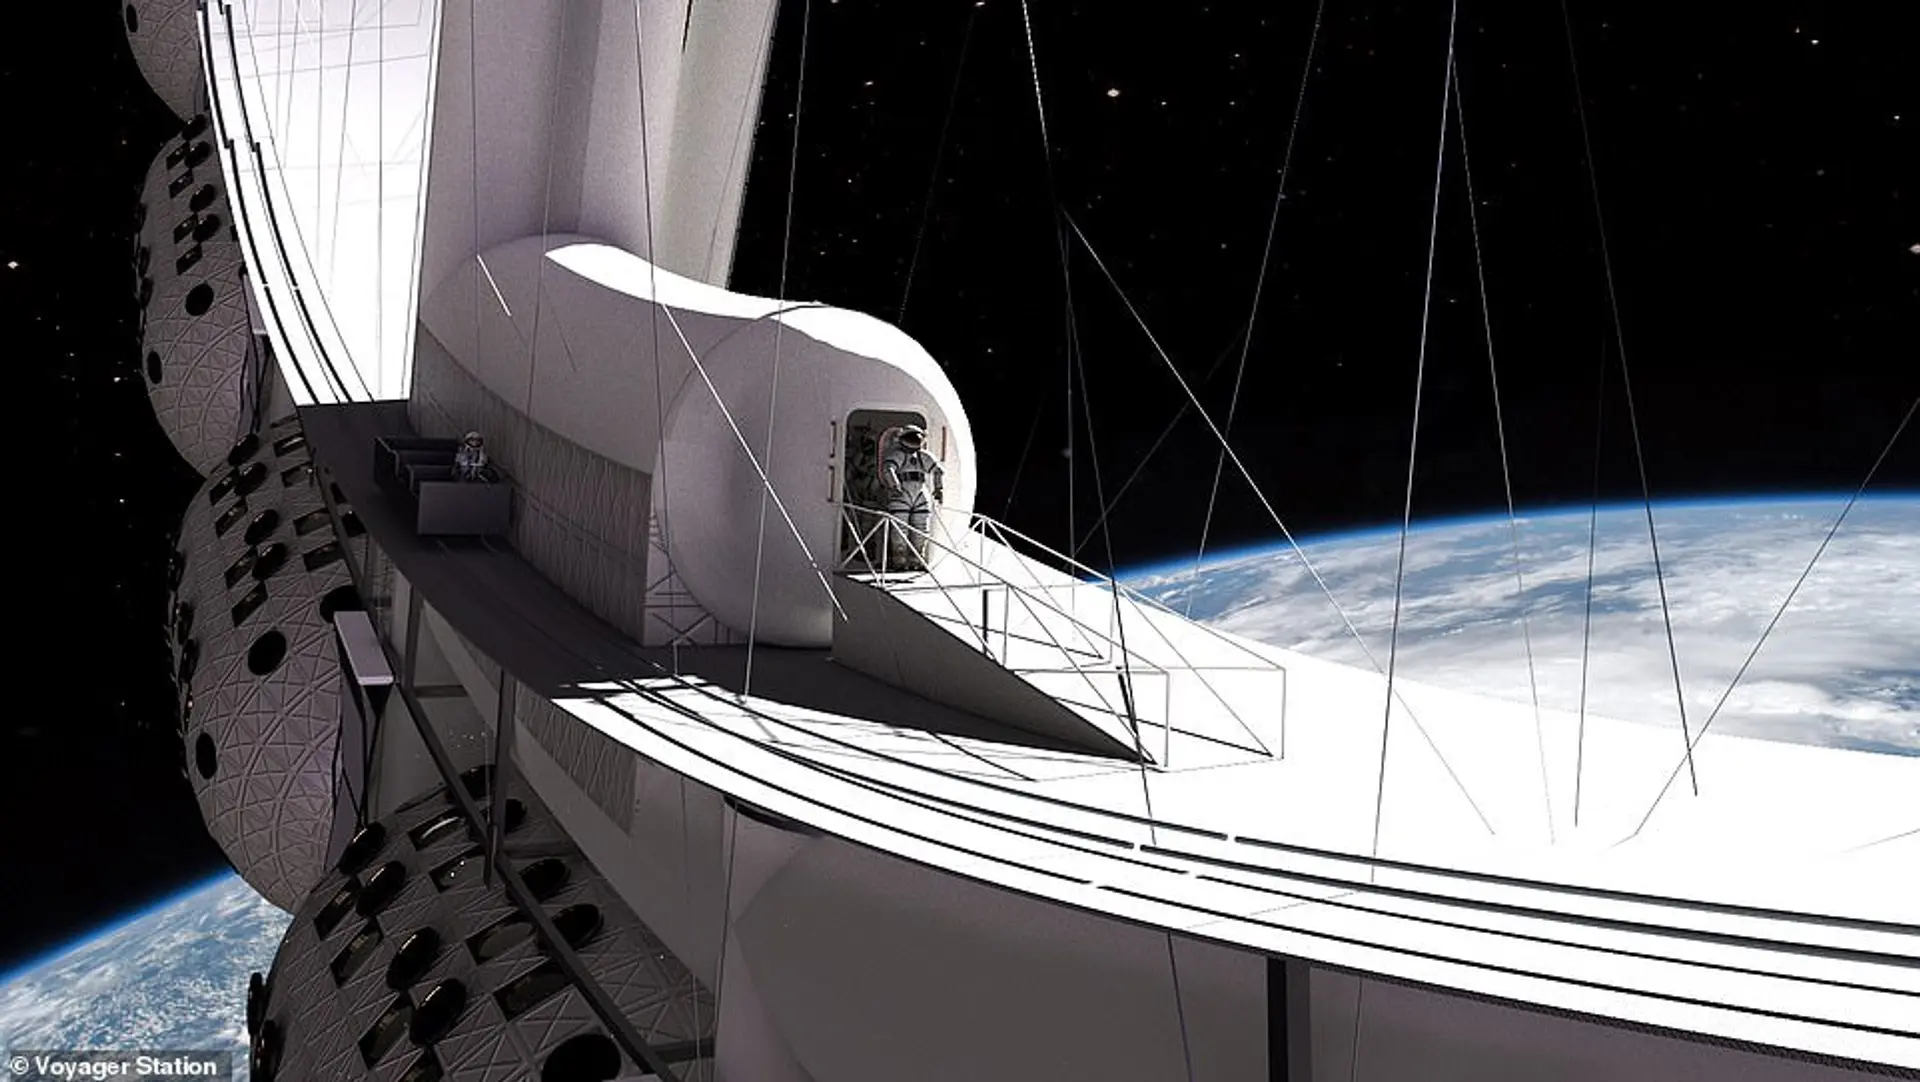 Hotels Articles - World’s First “Space Hotel” Starts Construction in 2025